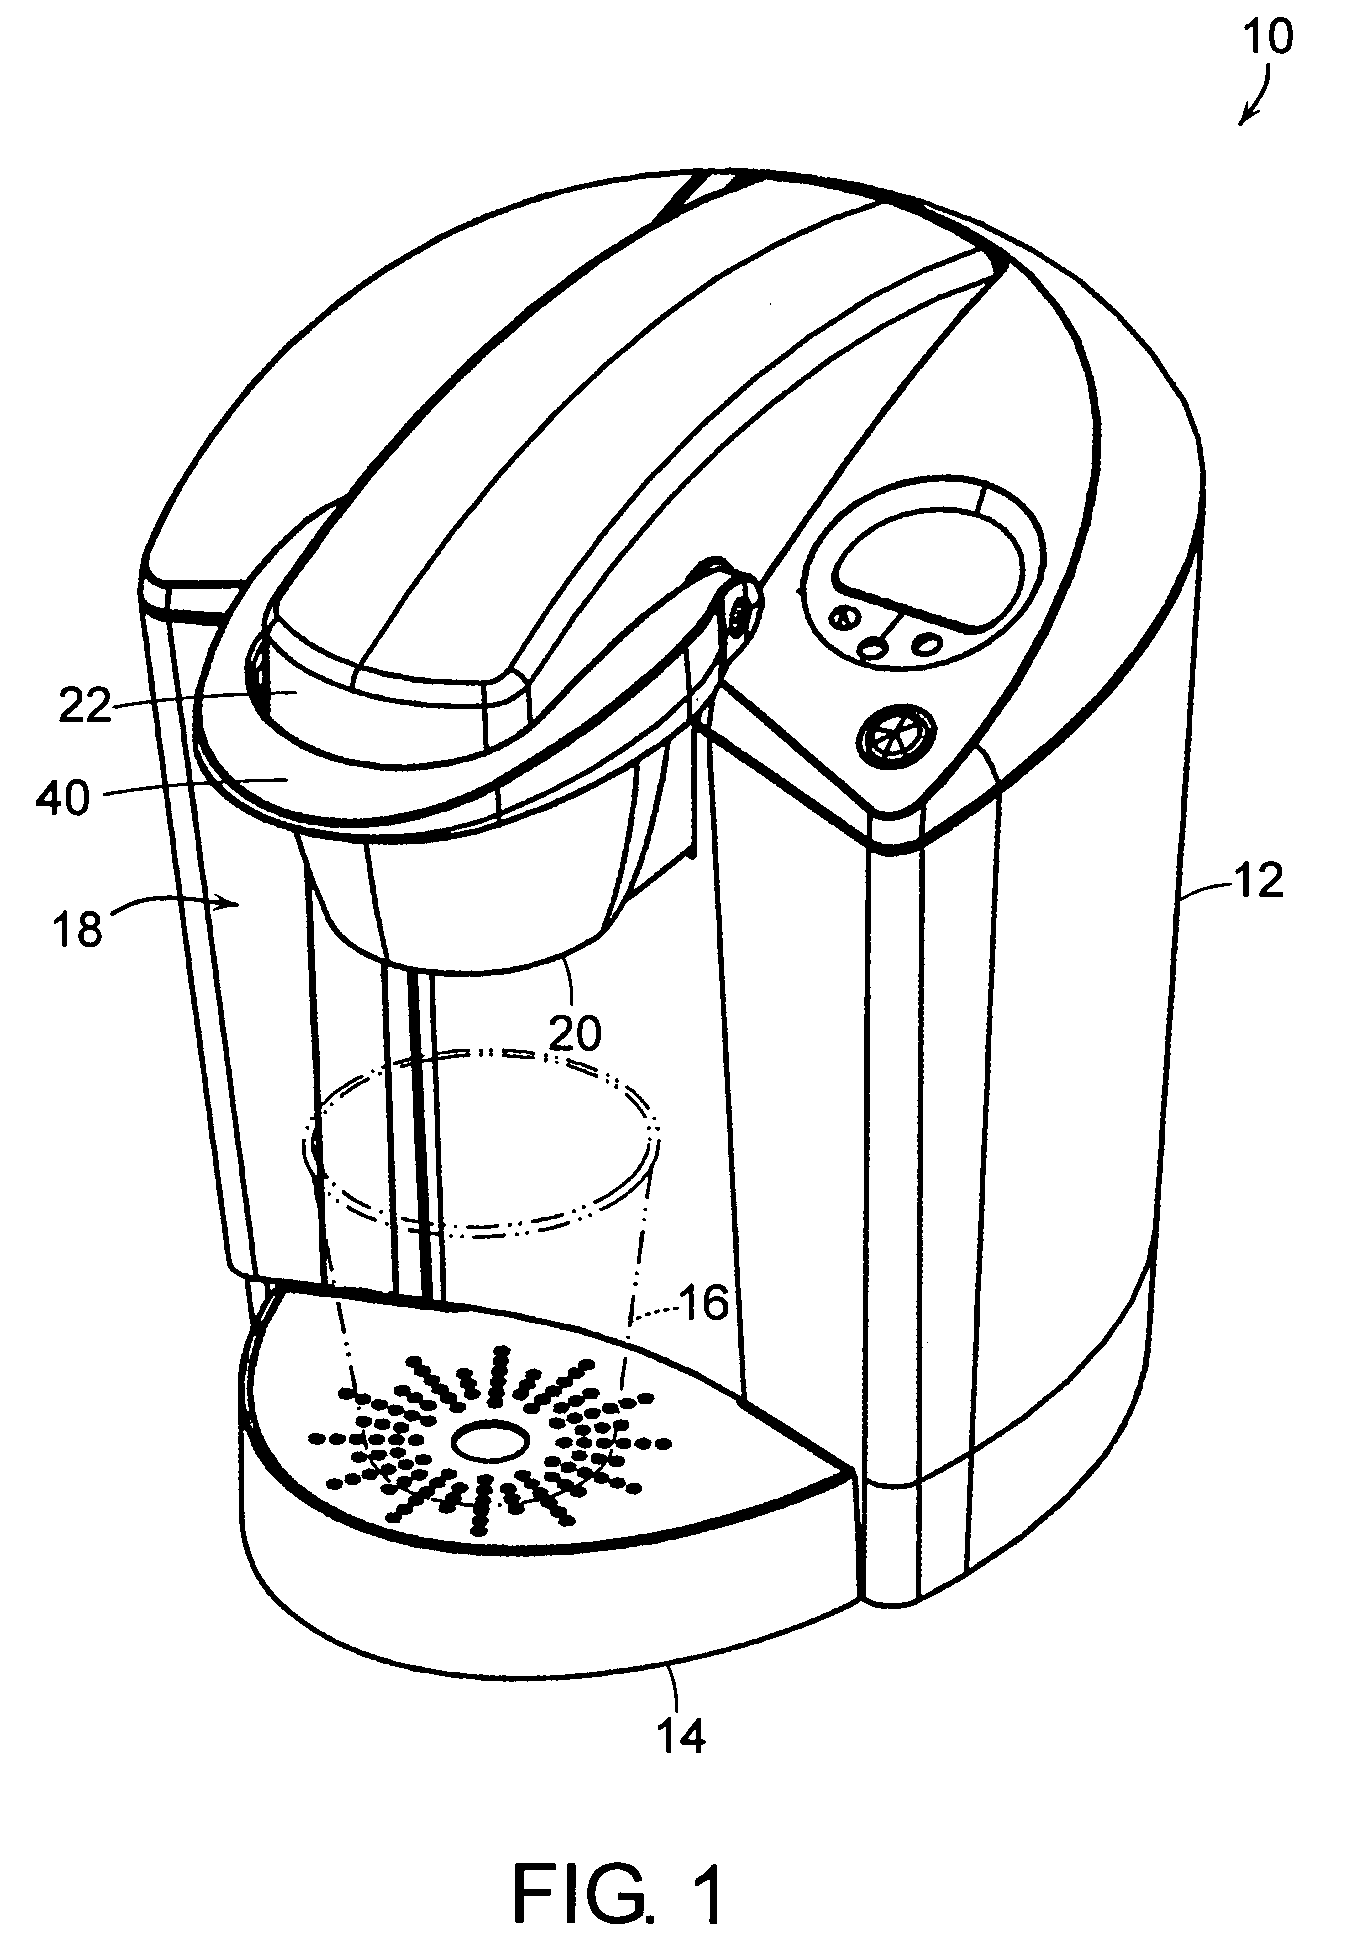 Brew chamber for a single serve beverage brewer